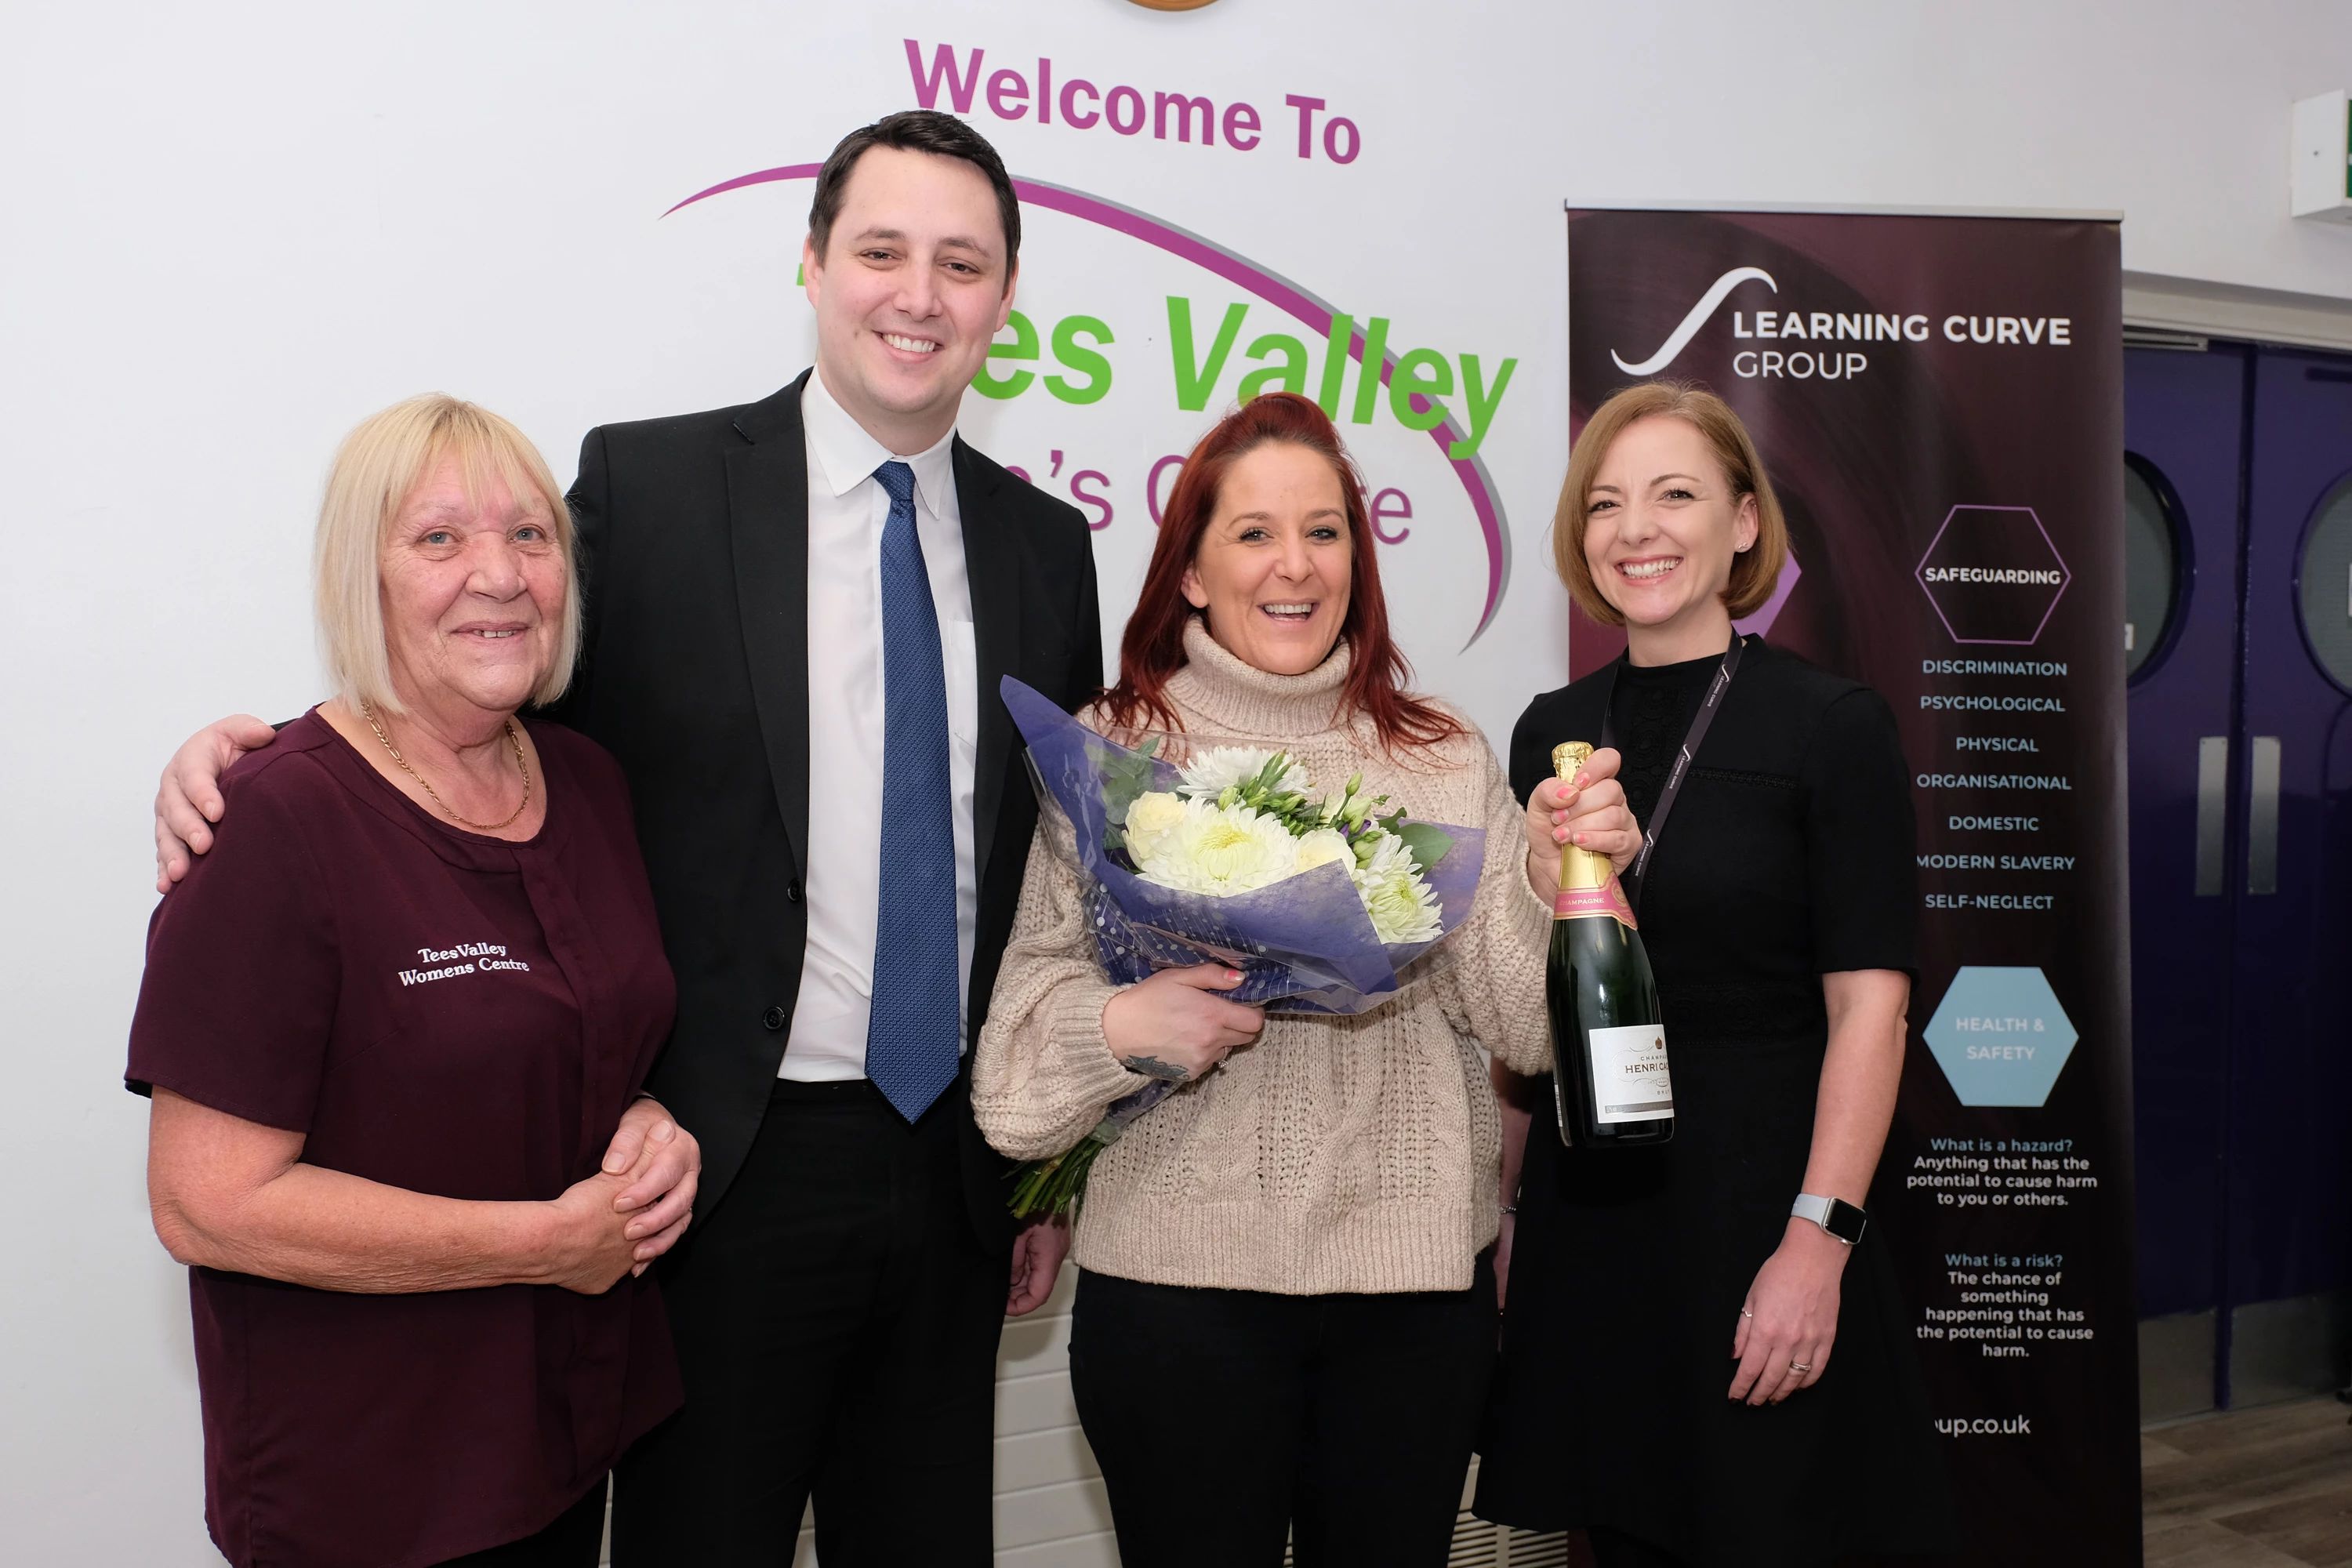 Mayor of Tees Valley Ben Houchen with Kathy Lloyd TVWC, Jodie the 1000th learner and Nicole Bewley Director of Skills celebrating how far Jodie has come.